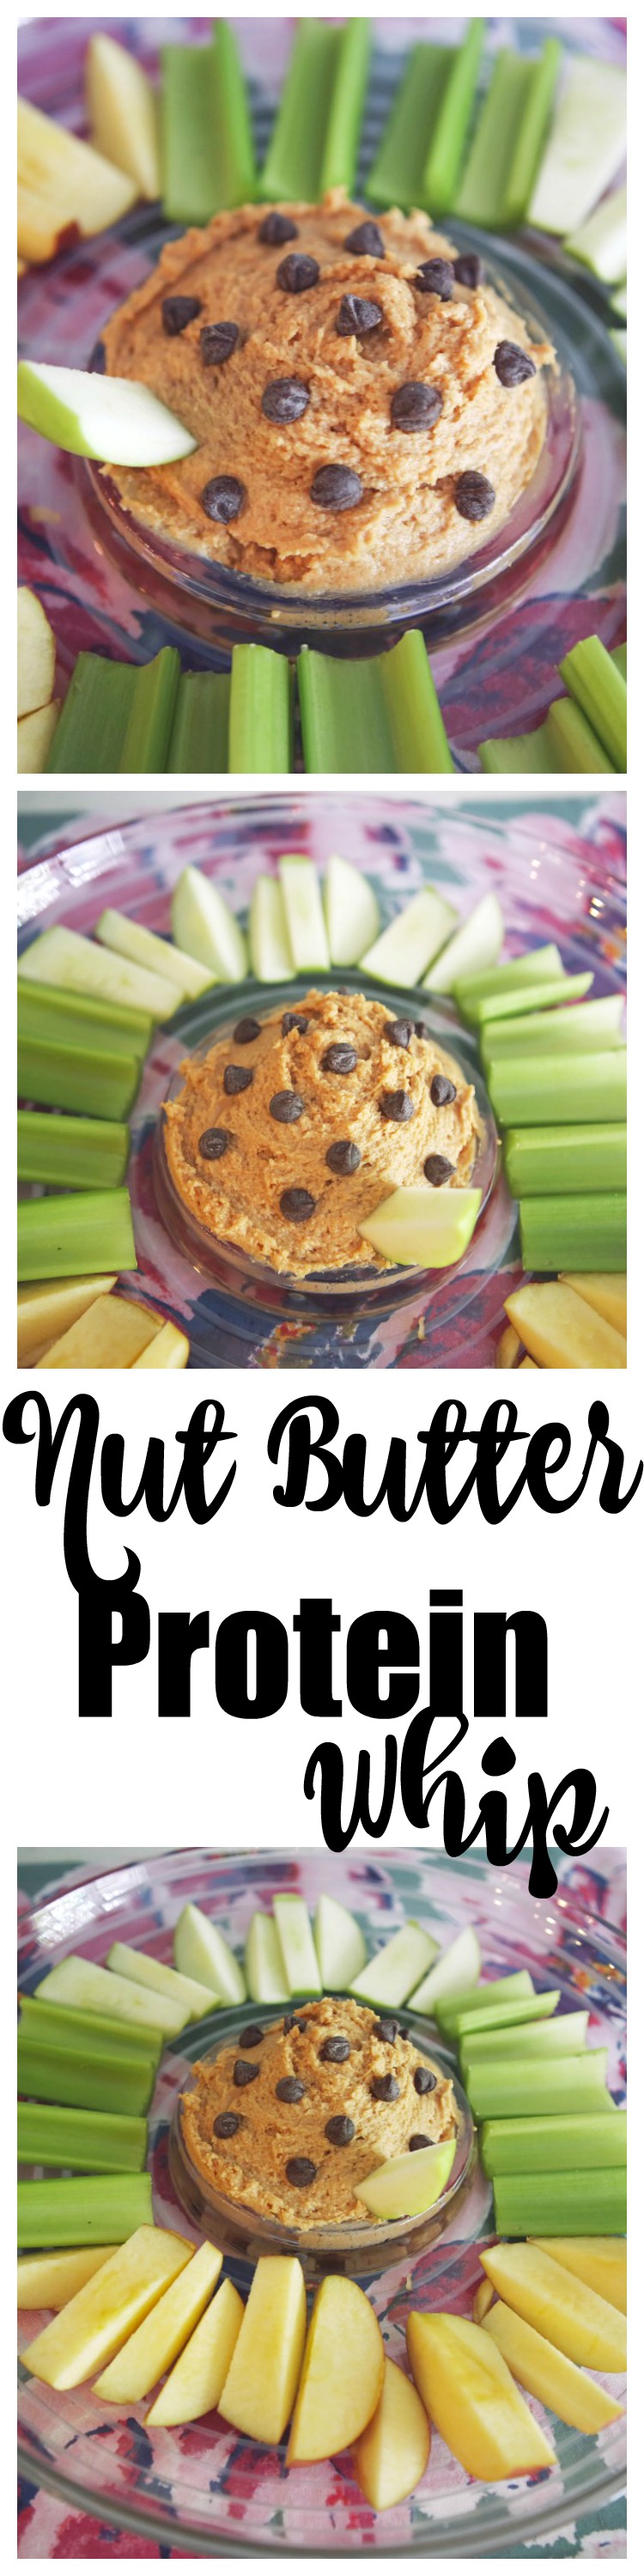 Nut Butter Protein Whip